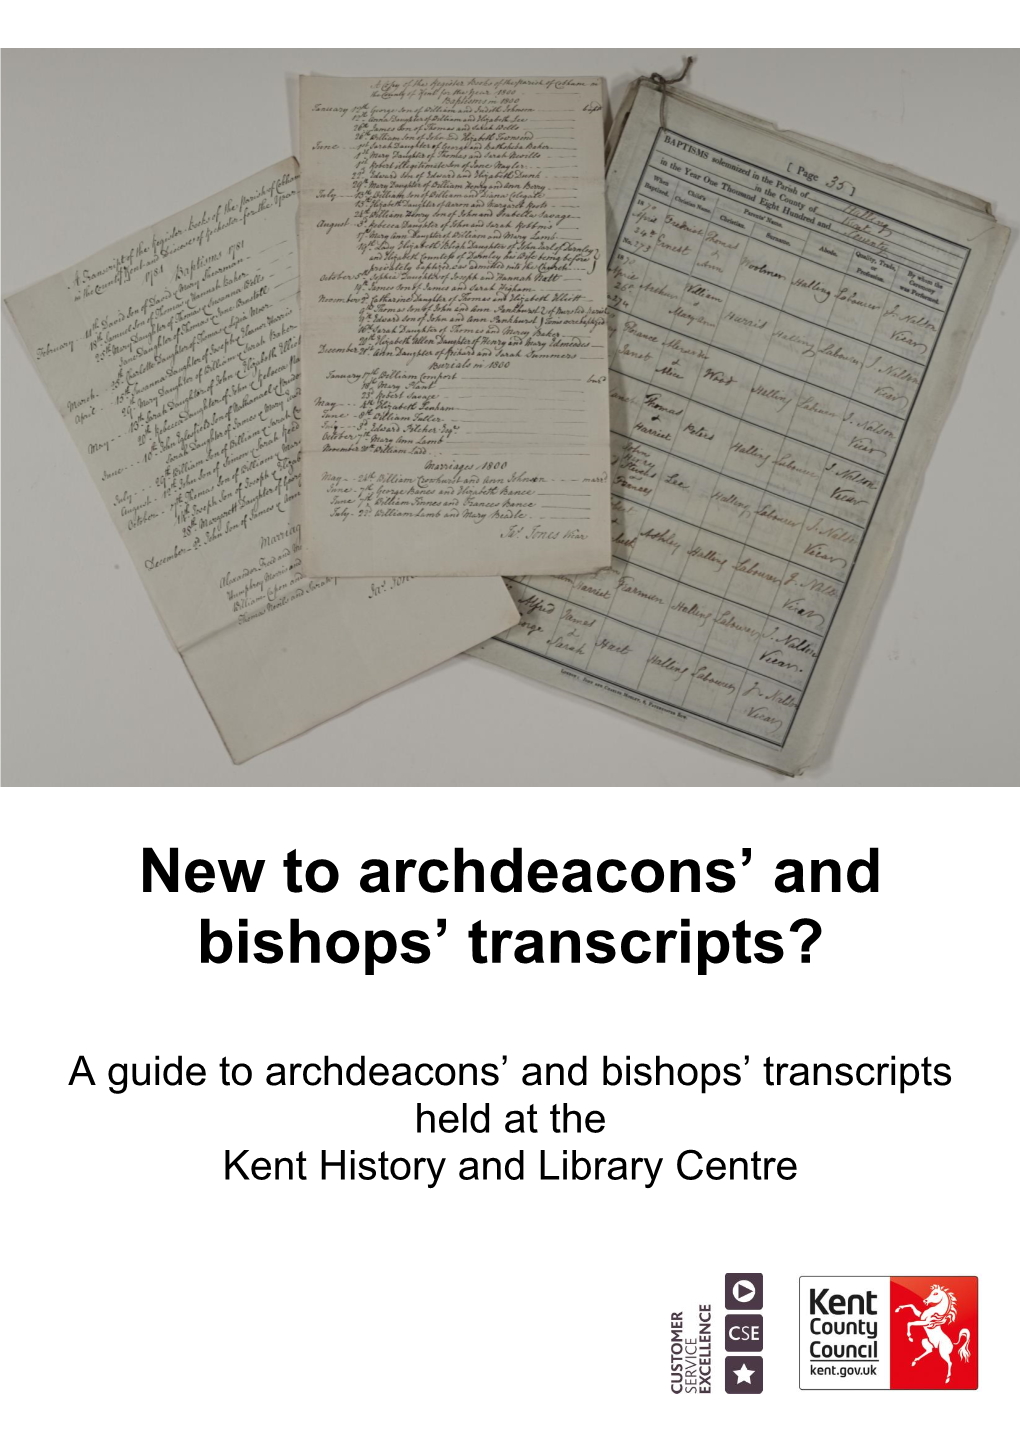 Guide to Archdeacons and Bishops Transcripts